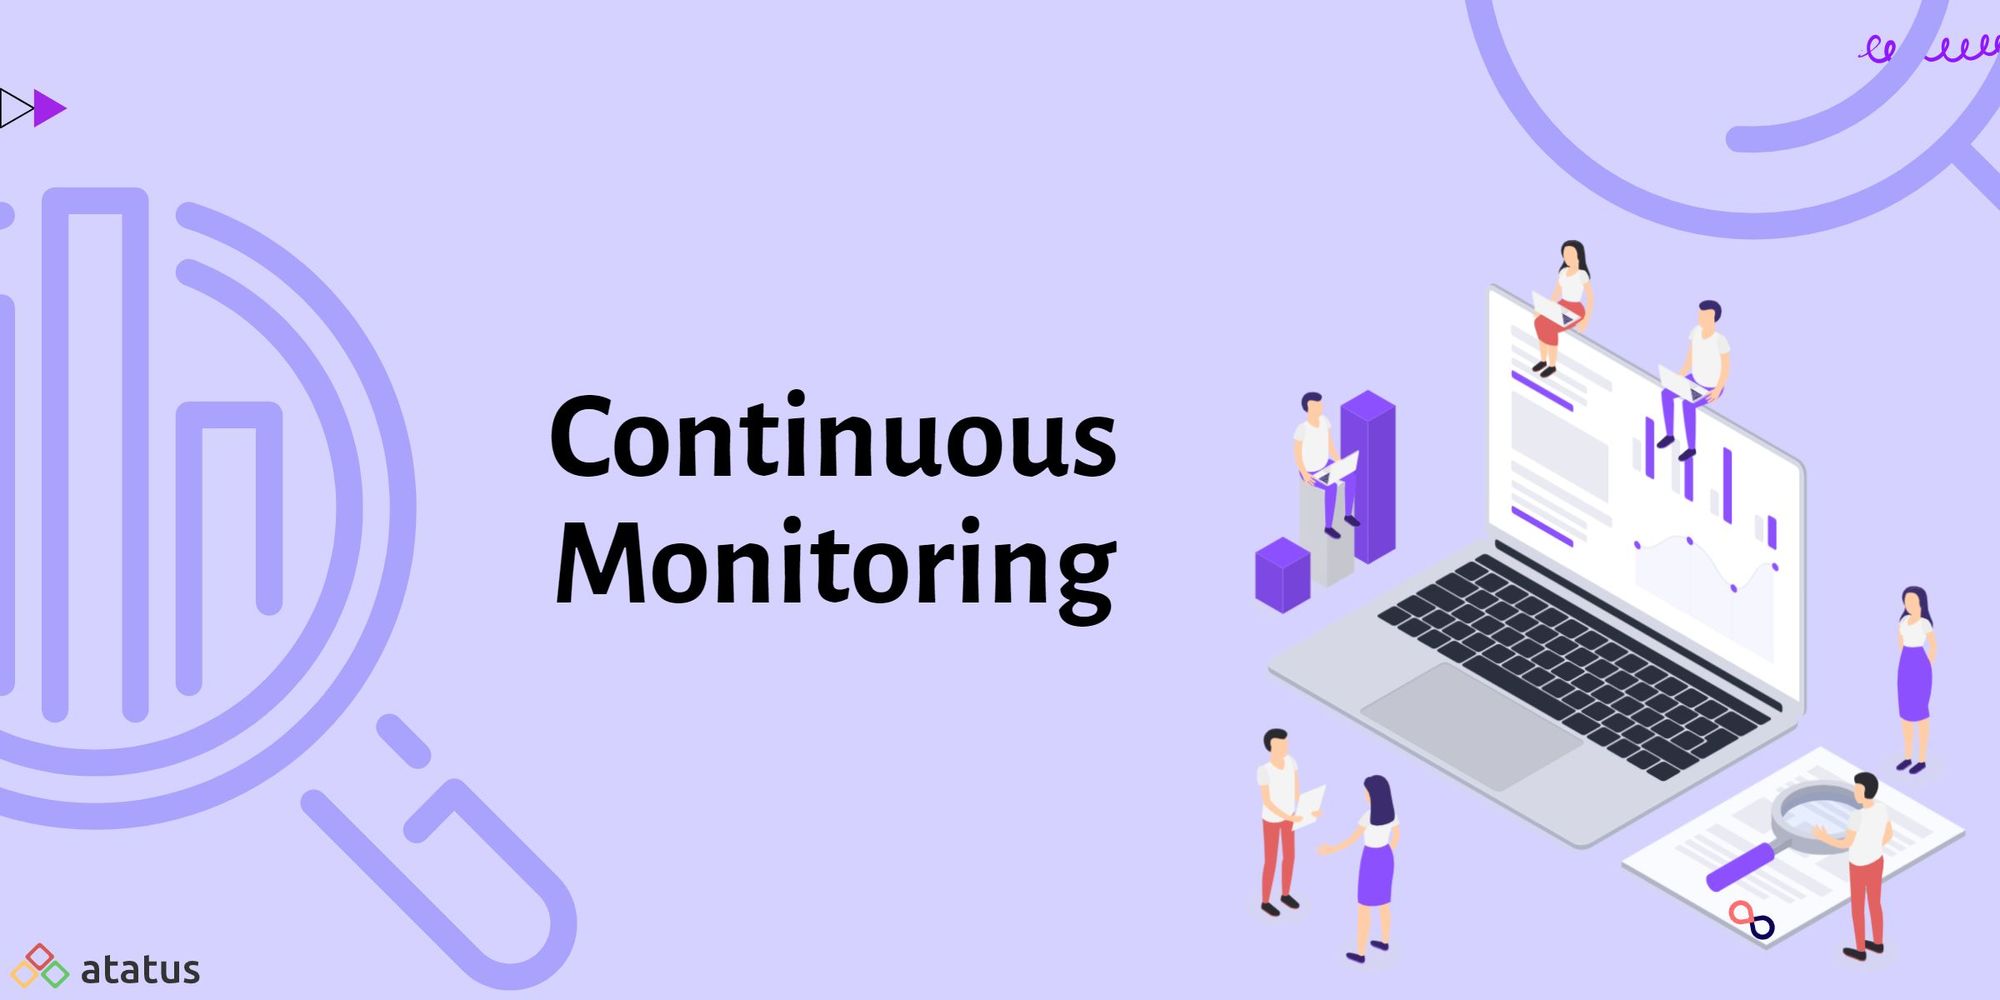 Continuous Monitoring: Definition, Types, Benefits and More